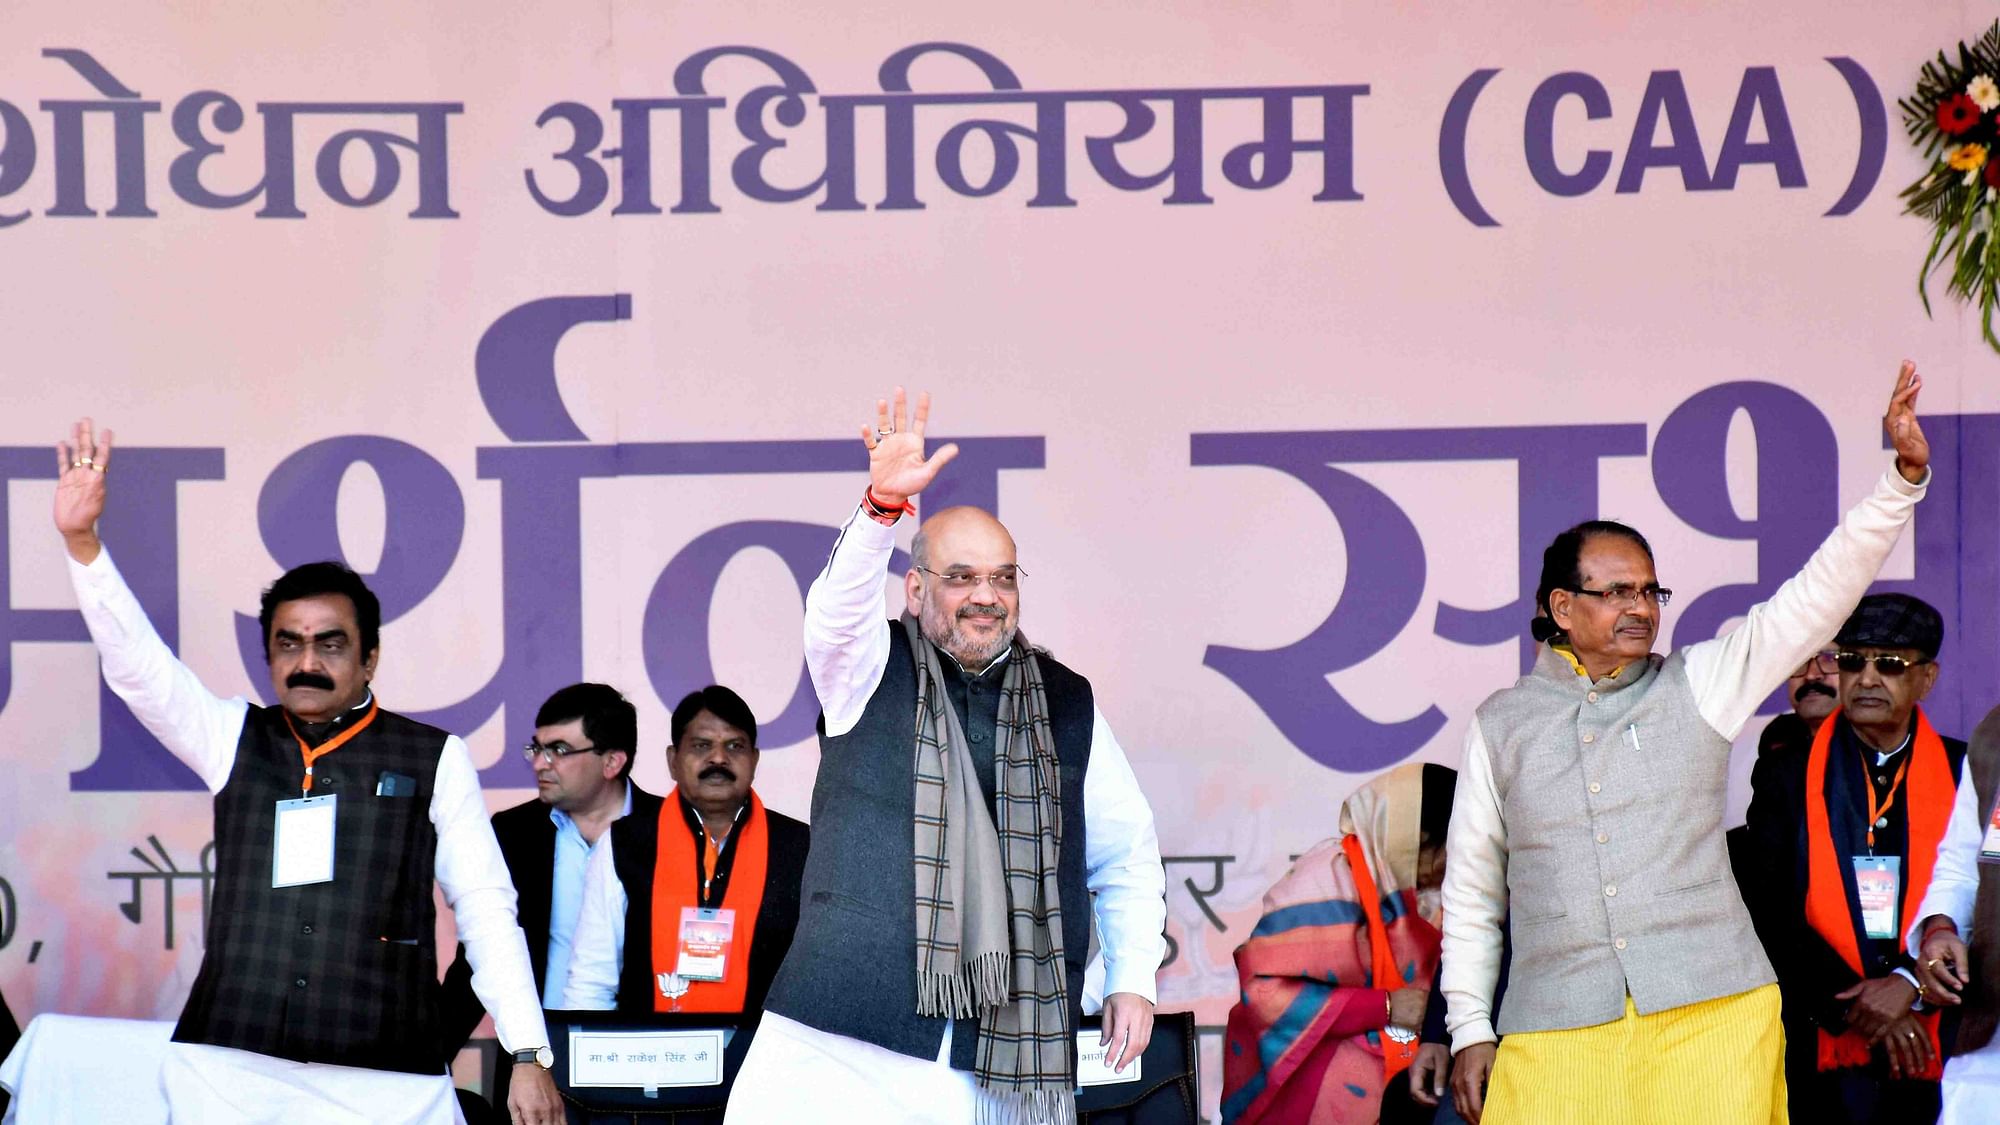 Union Home Minister Amit Shah with former MP chief minister Shivraj Singh Chouhan and State BJP president Rakesh Singh during a CAA awareness event, in Jabalpur.&nbsp;